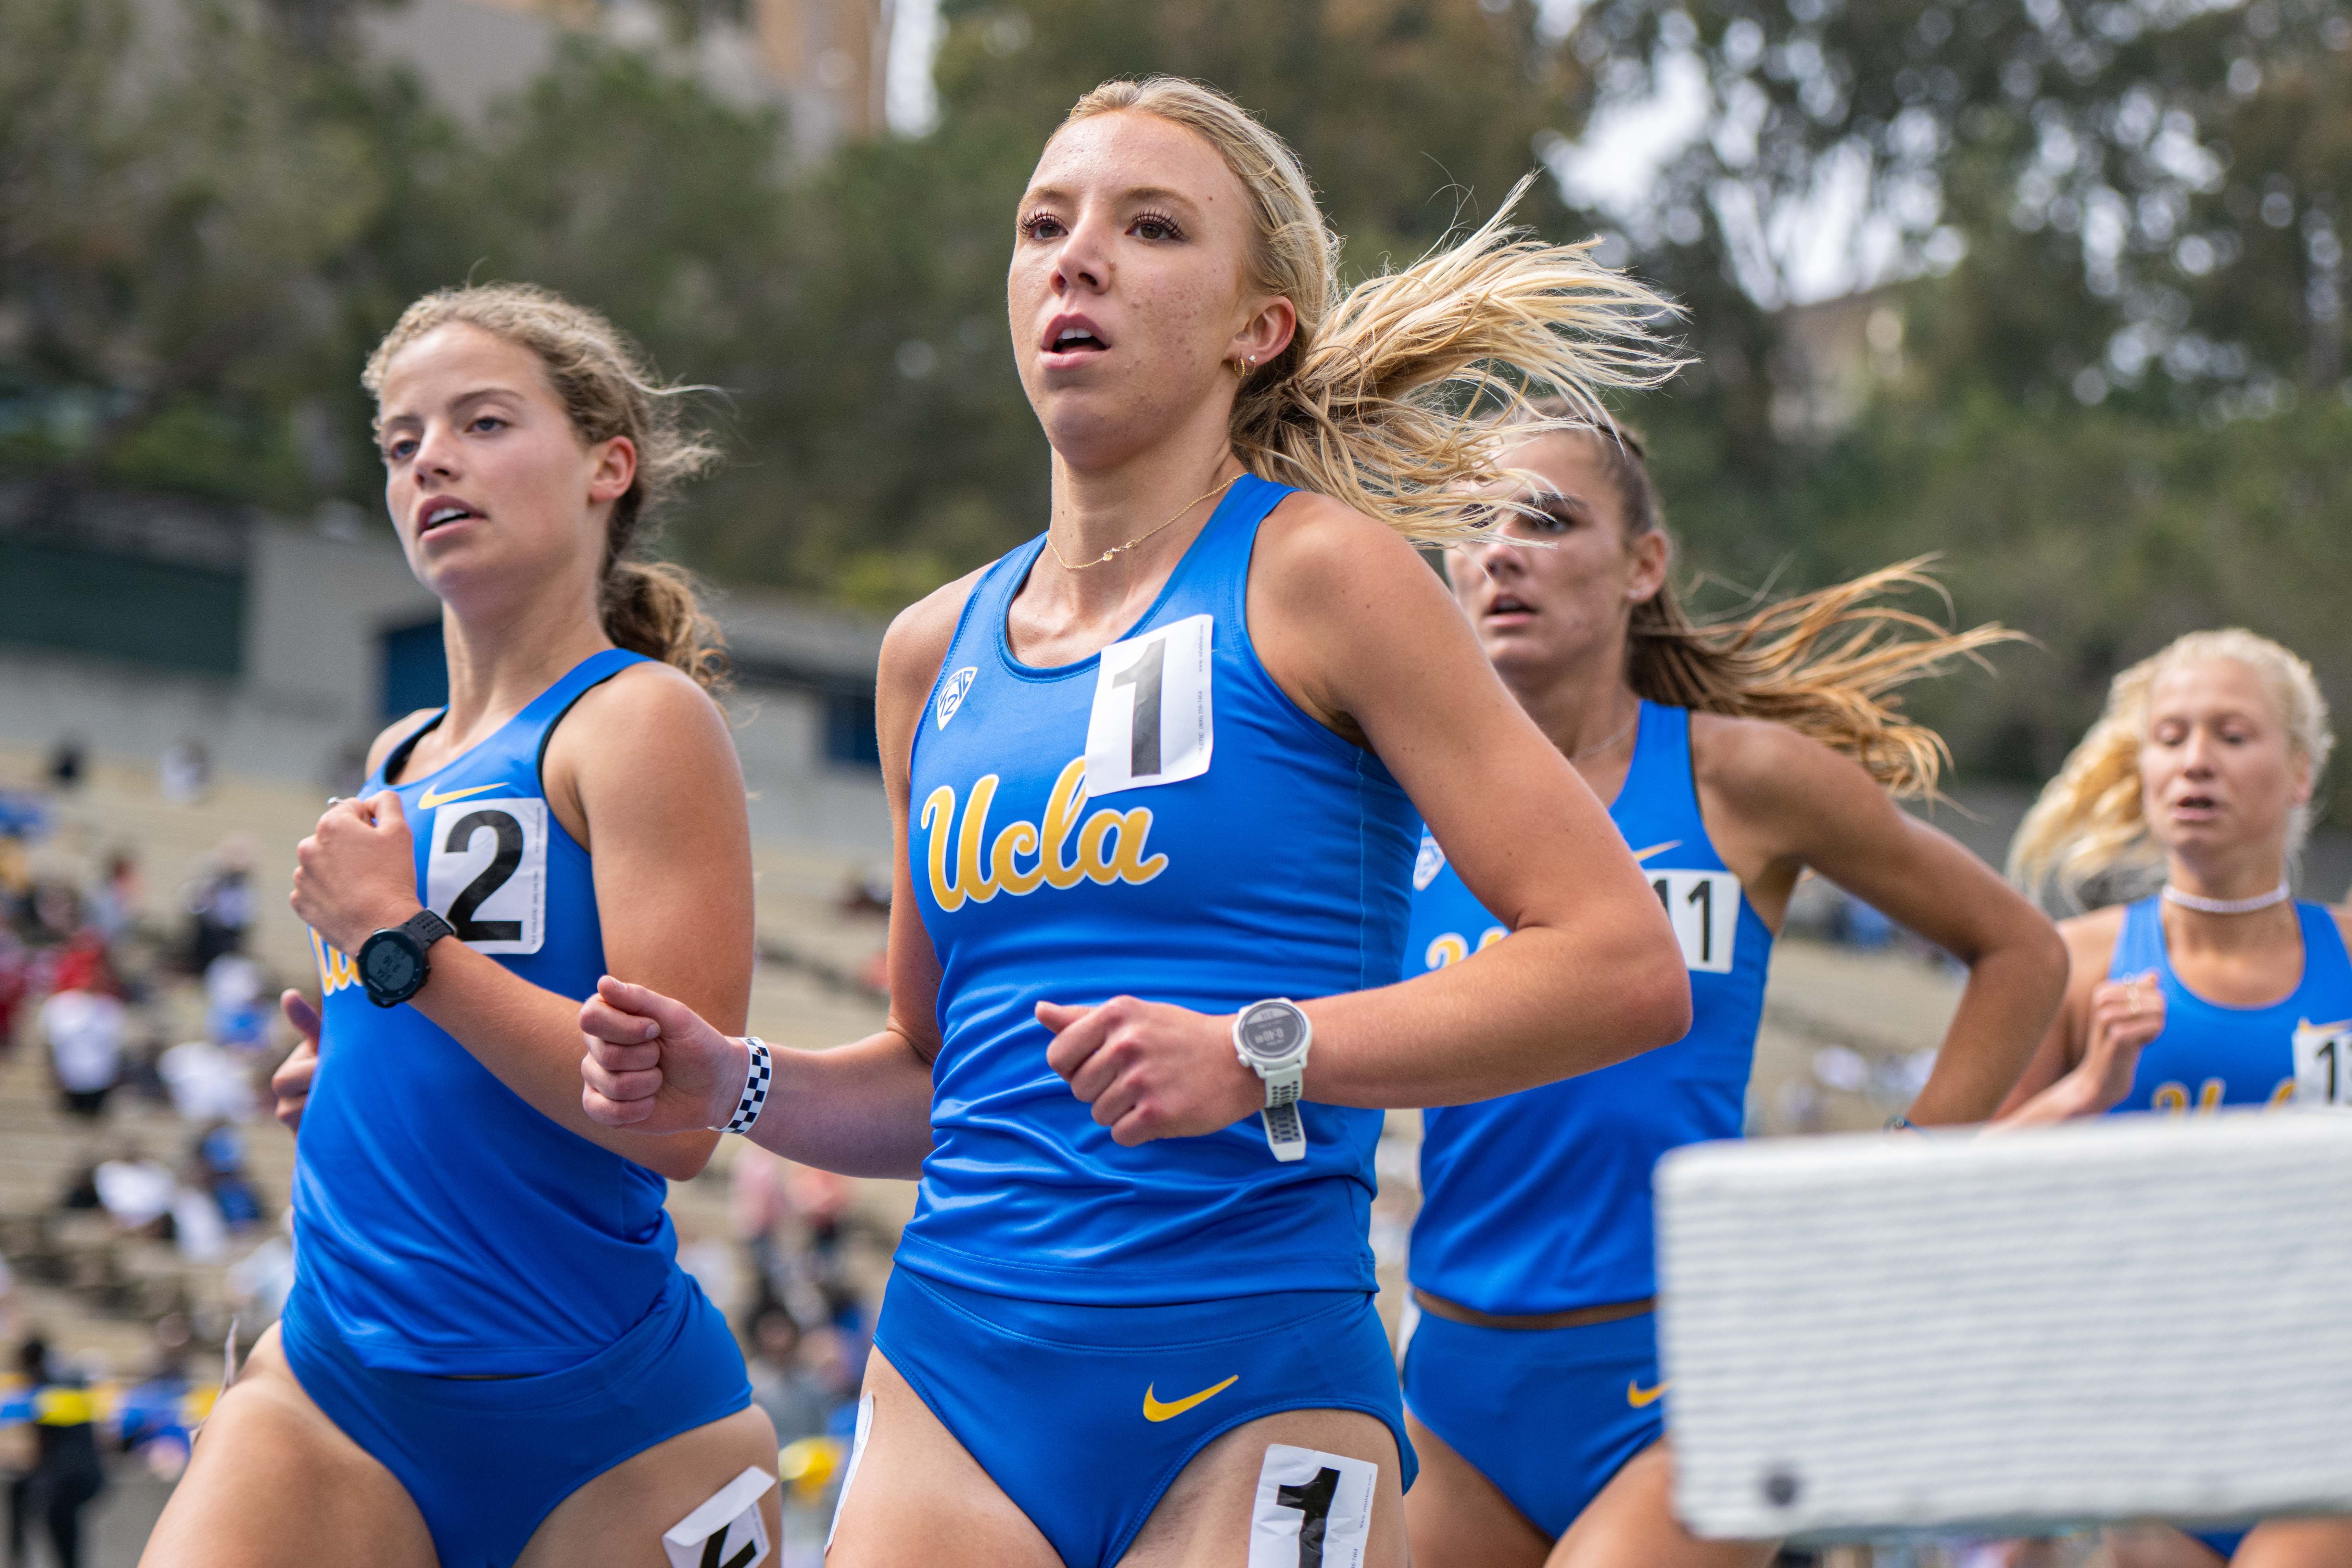 After success at prelims, UCLA track & field heads to Texas for NCAA  championships - Daily Bruin